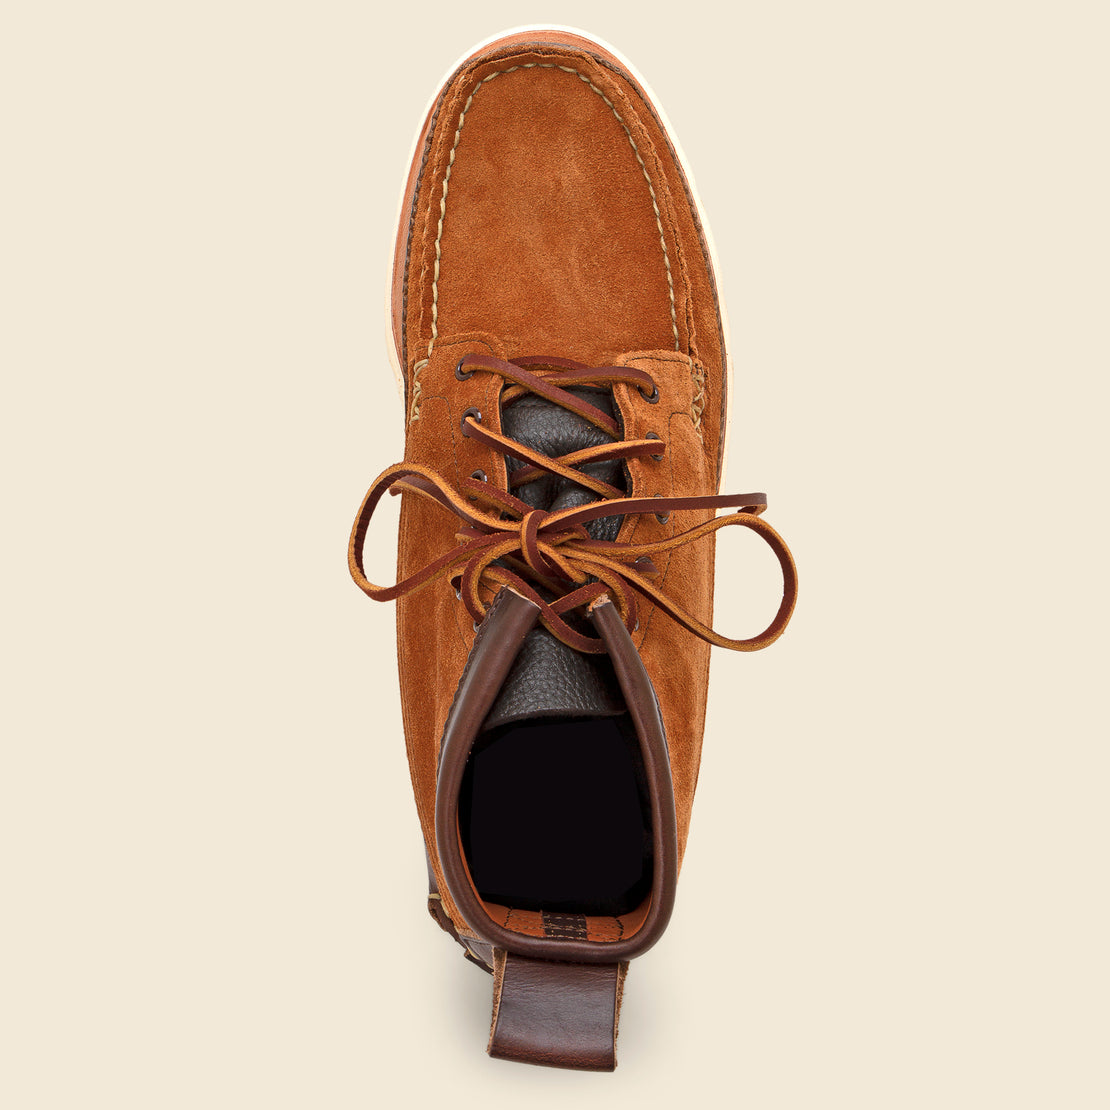 Maine Guide 6 Eye DB Boots - FO G Brown x G Brown - Yuketen - STAG Provisions - Shoes - Boots / Chukkas